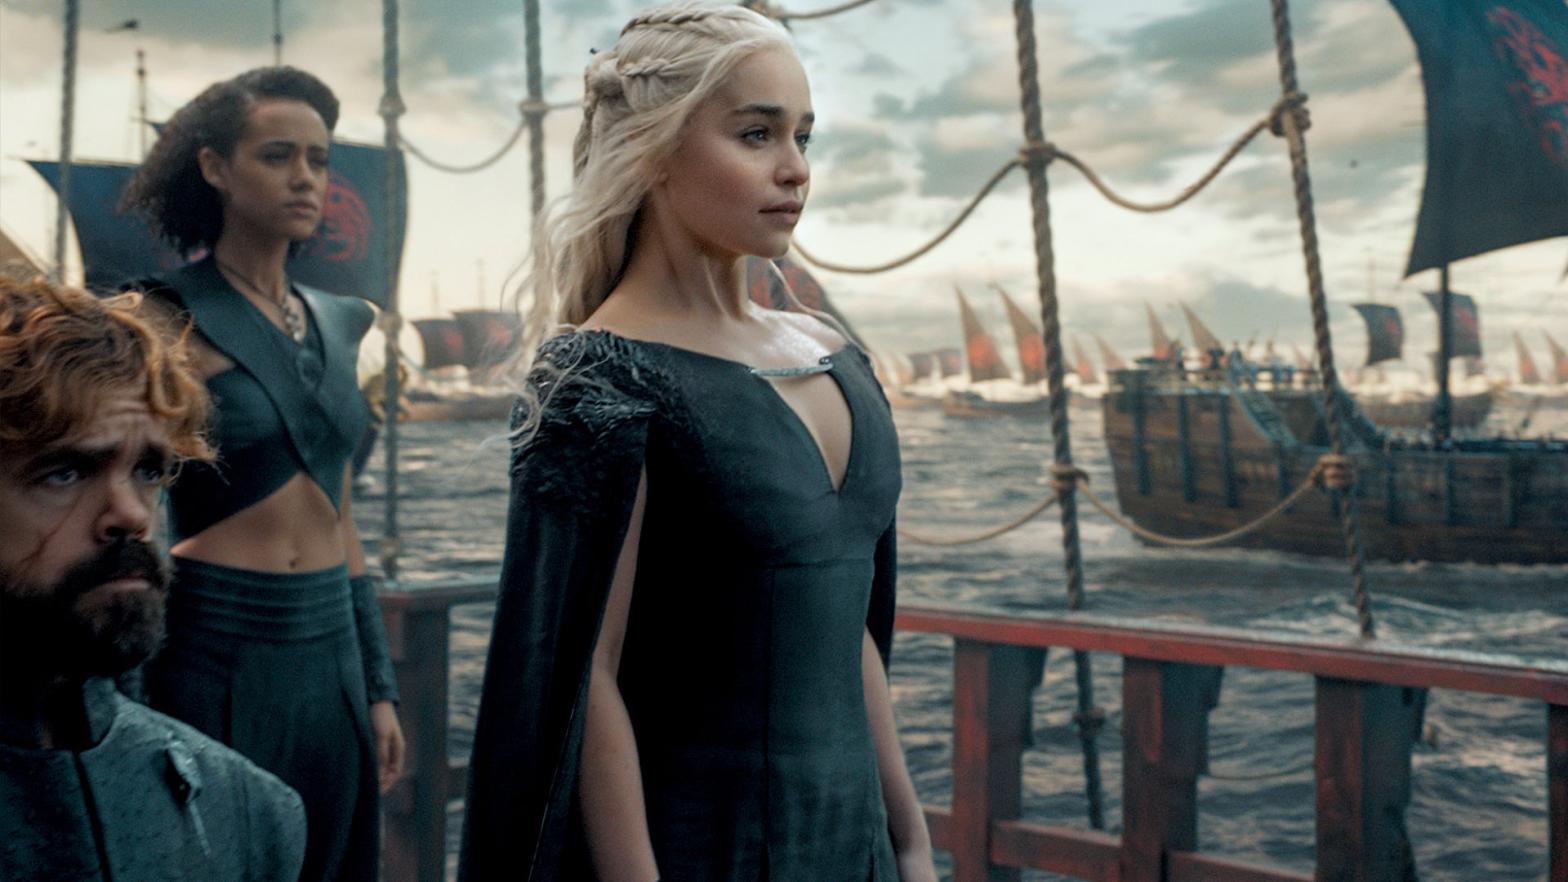 Tyrion, Missandei, and Daenerys set sail for Sin City. (Image: HBO)